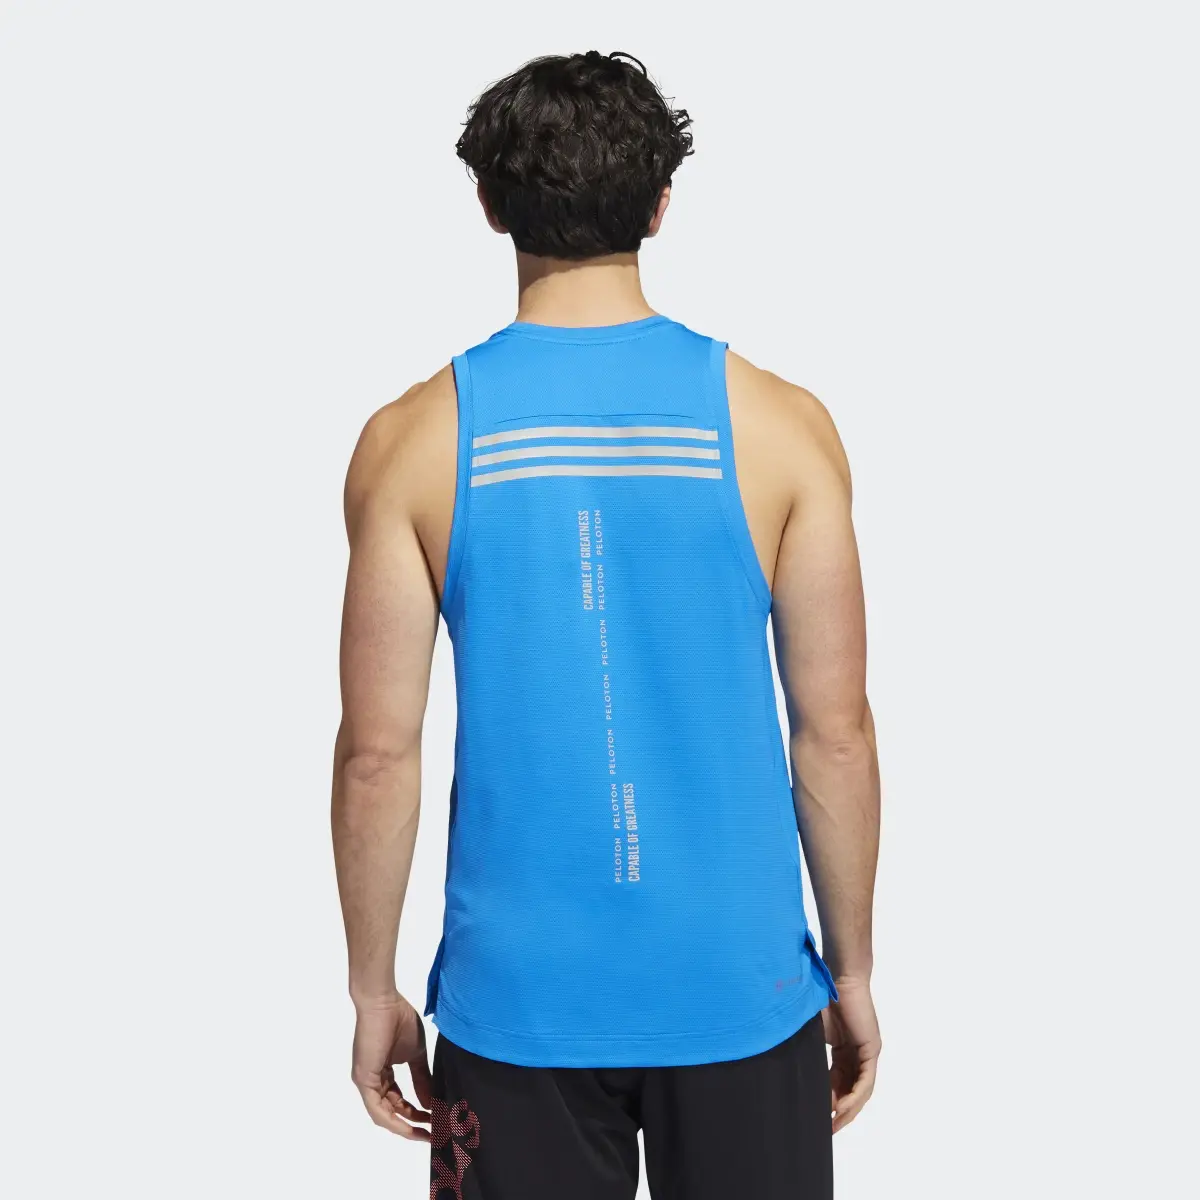 Adidas Capable of Greatness Training Tank Top. 3